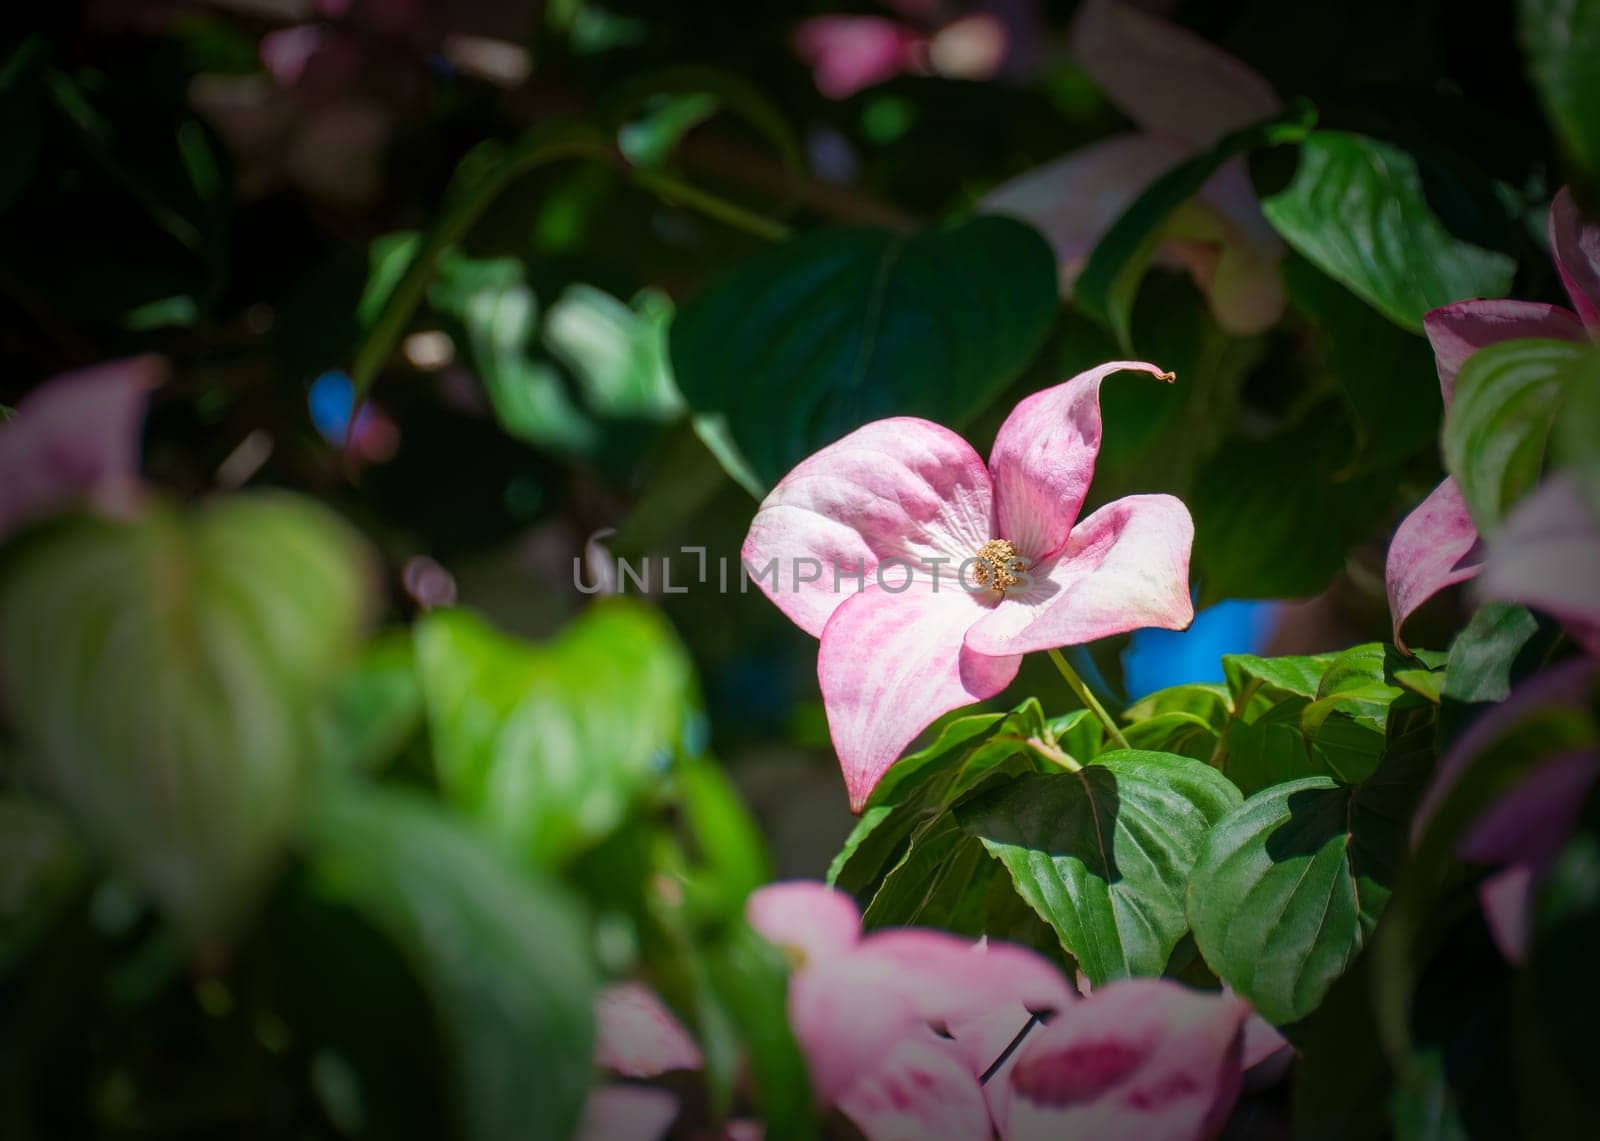 Four petal pink flower among green leaves by Imagenet